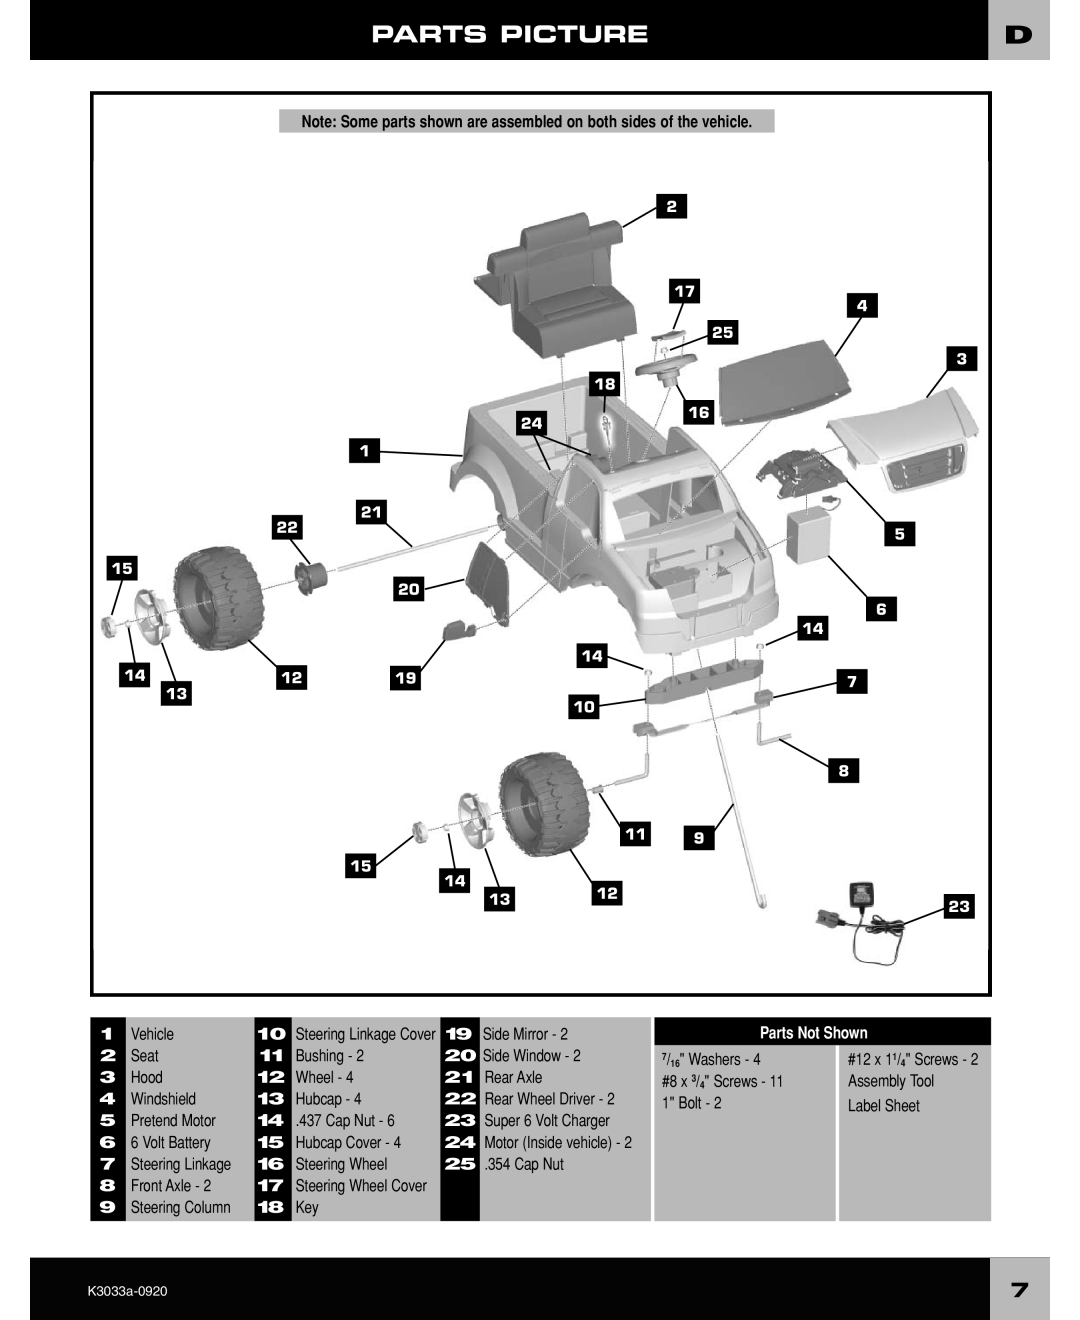 Ford F-150 owner manual Parts Picture, Note Some parts shown are assembled on both sides of the vehicle, Parts Not Shown 